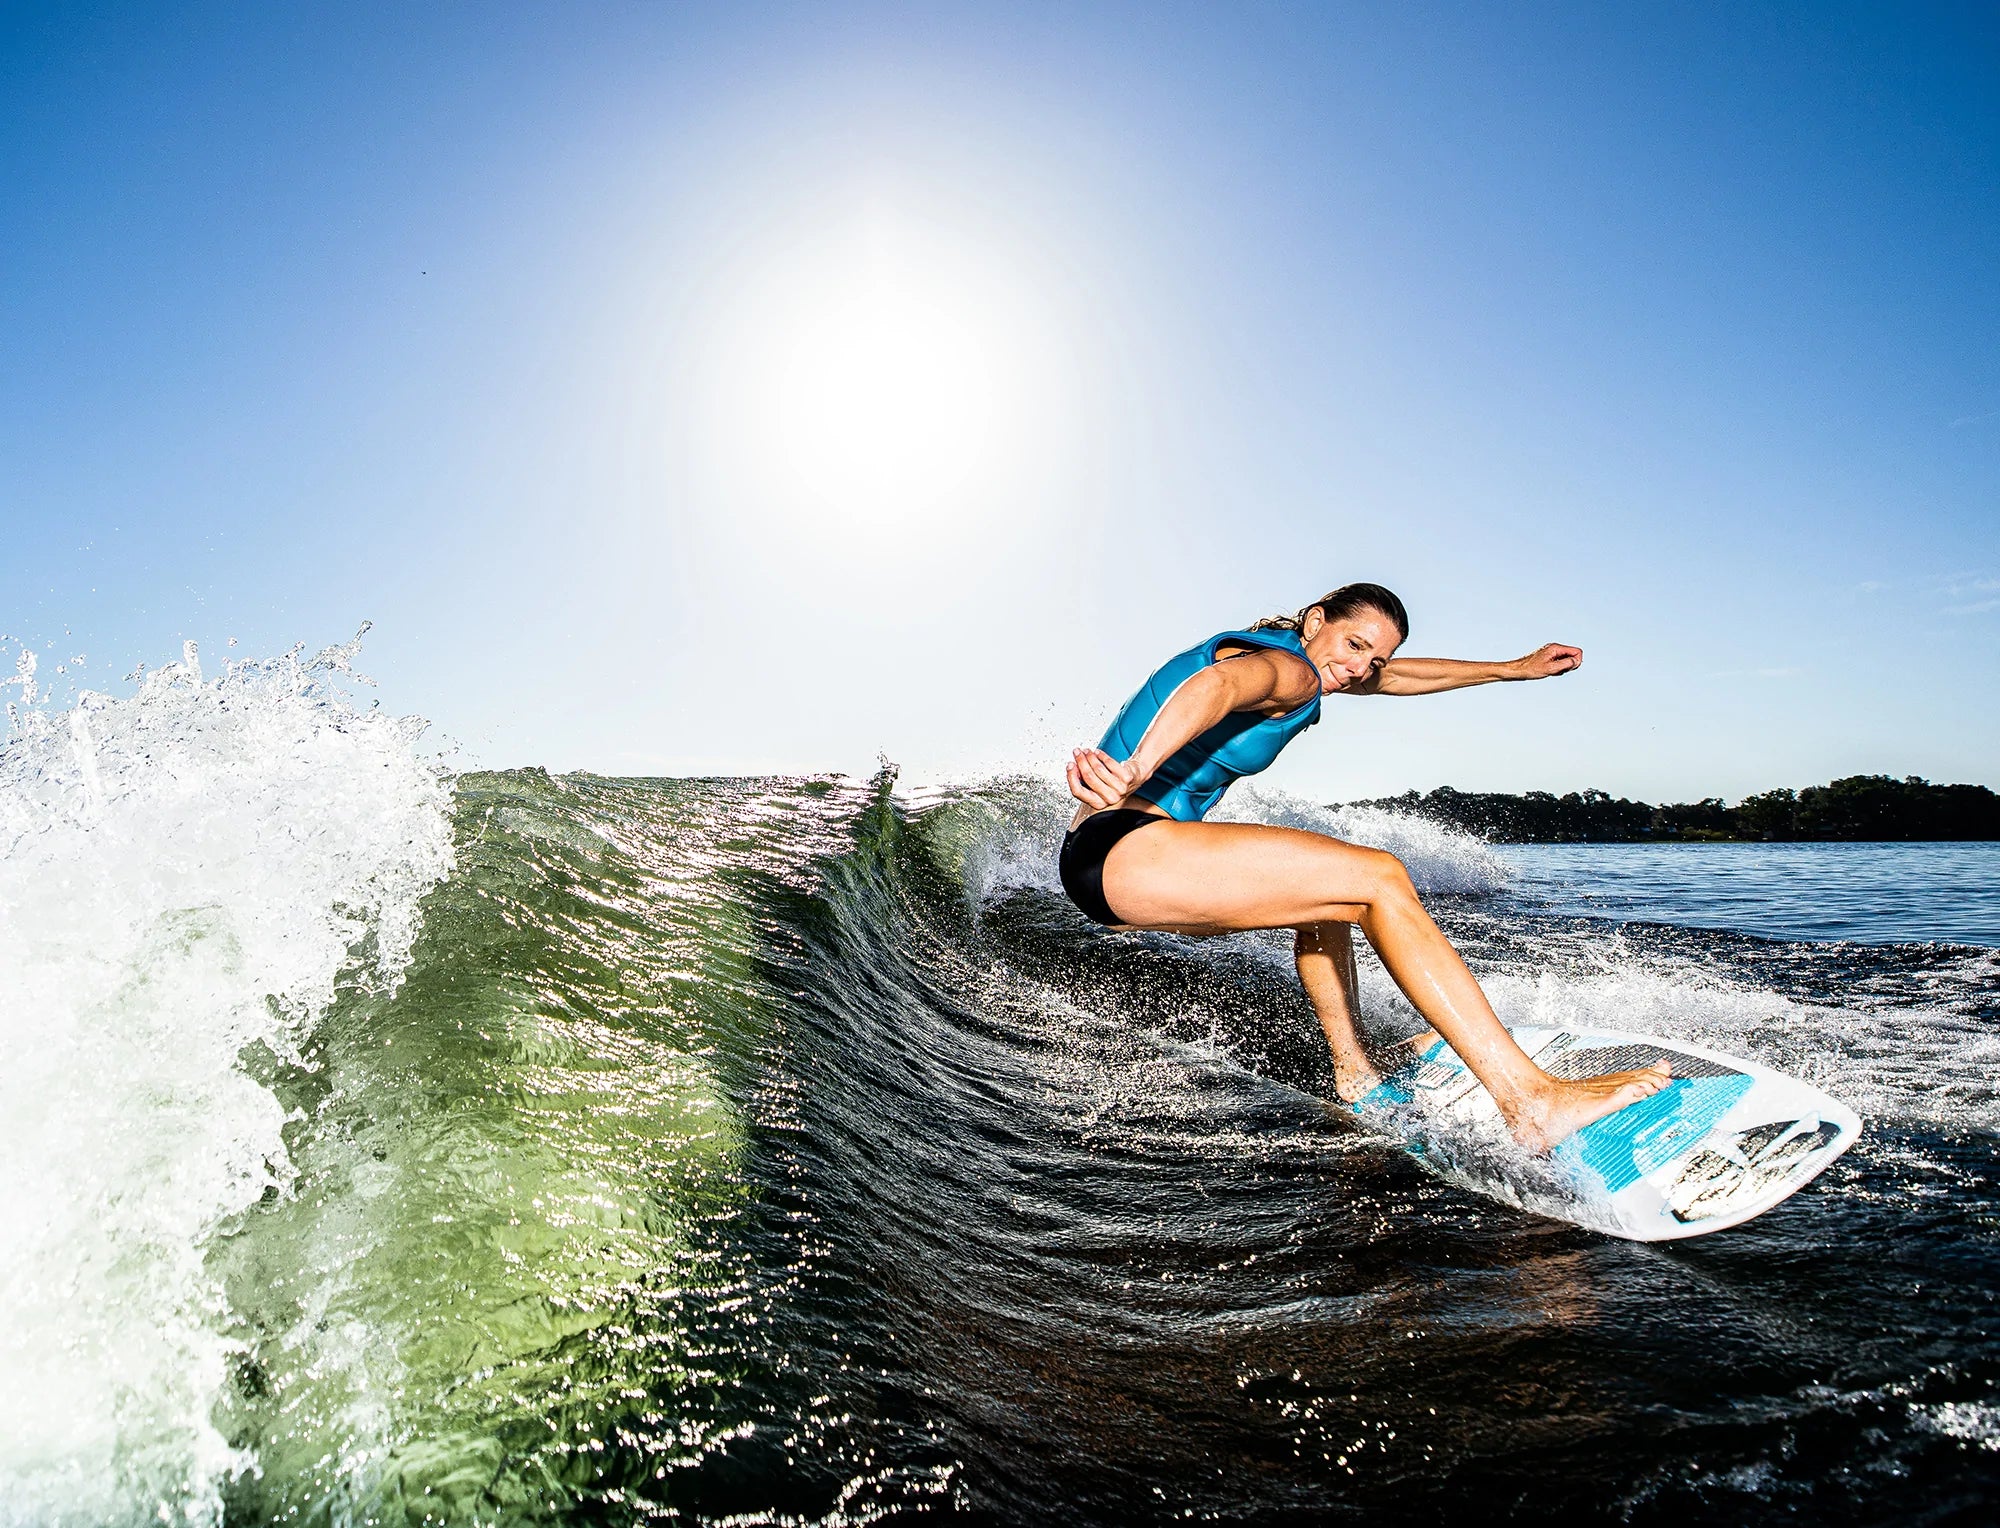 Stacia Bank effortlessly rides a wave on her Phase 5 2023 Swell Wakesurf Board, showcasing the incredible performance of FLEXtec V2.